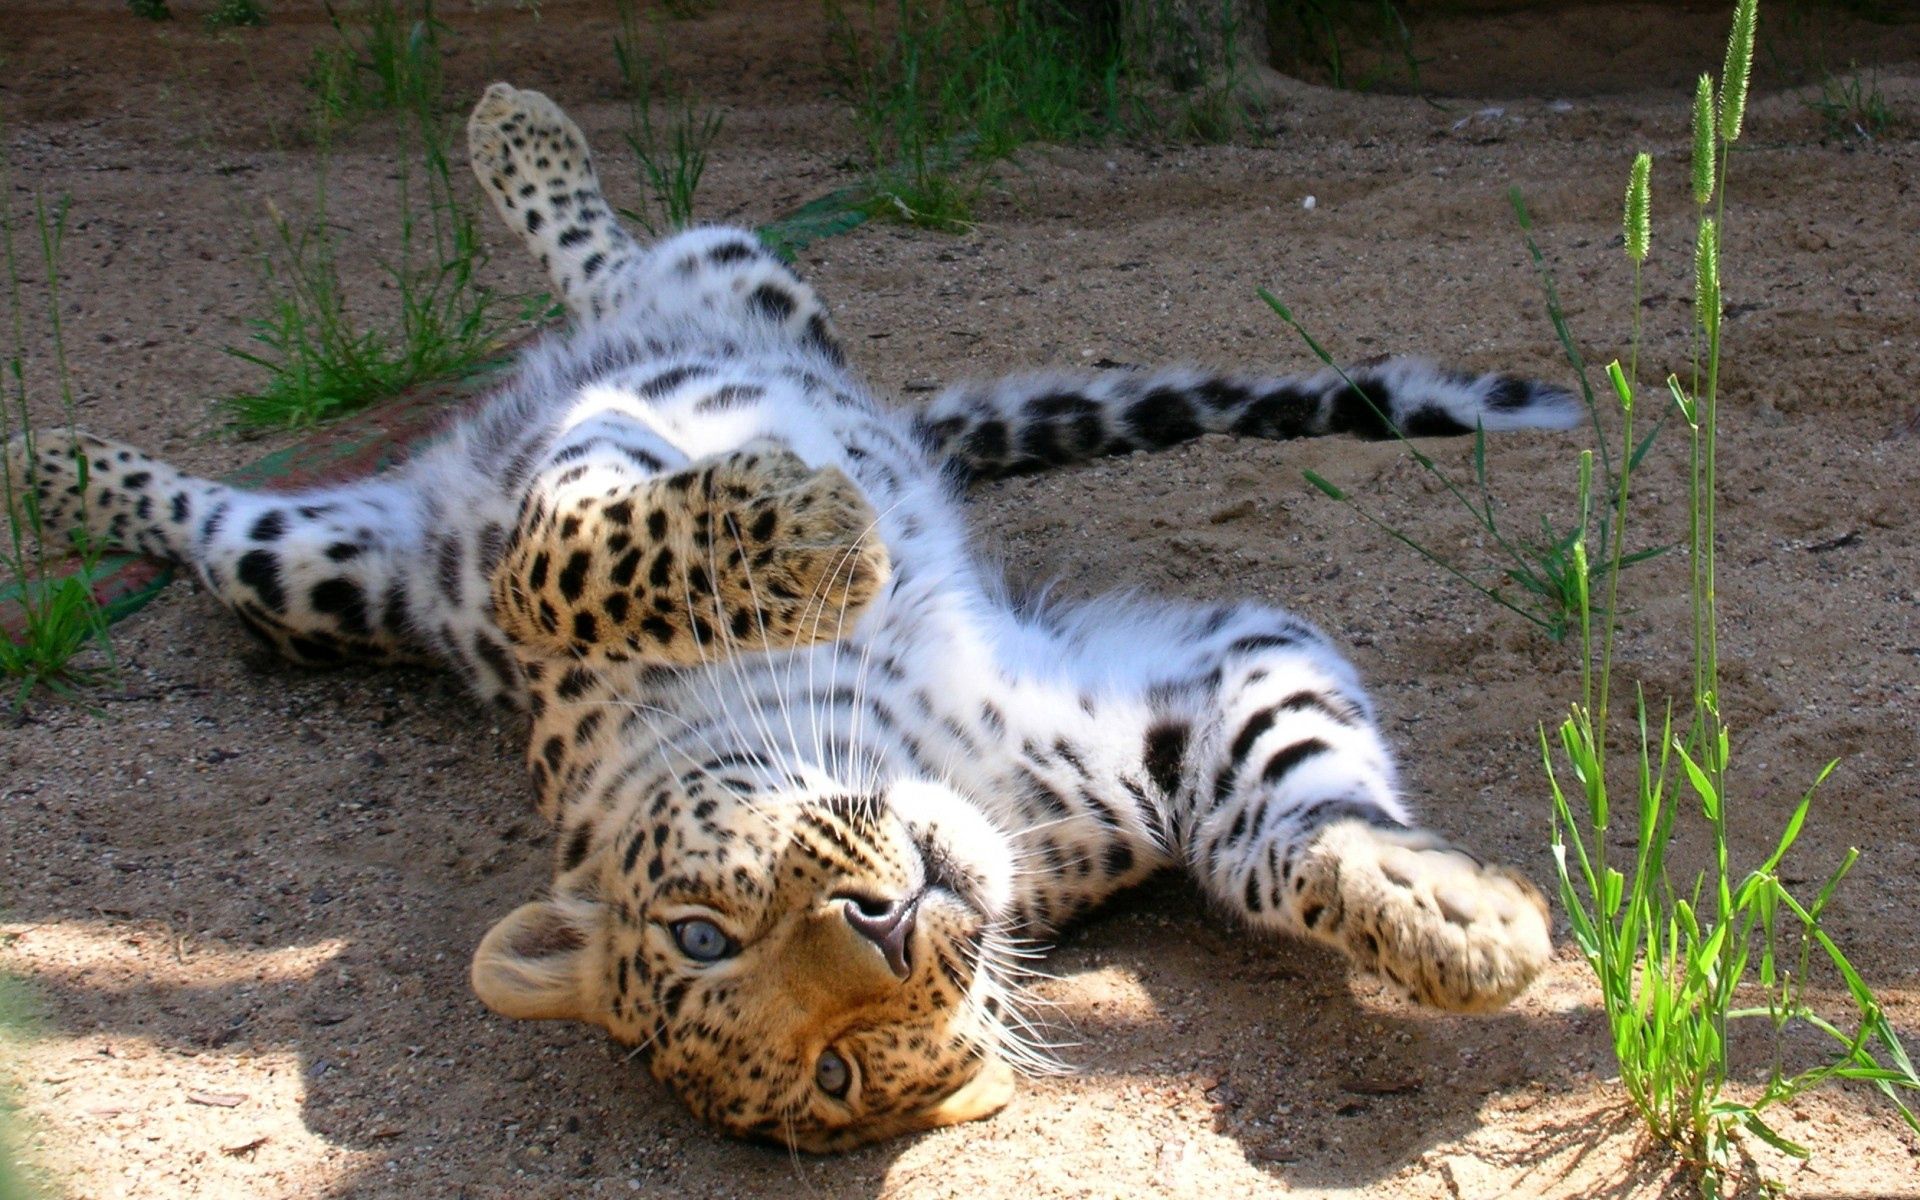 leopard, joey, animals, young, playful, tumble, somersault